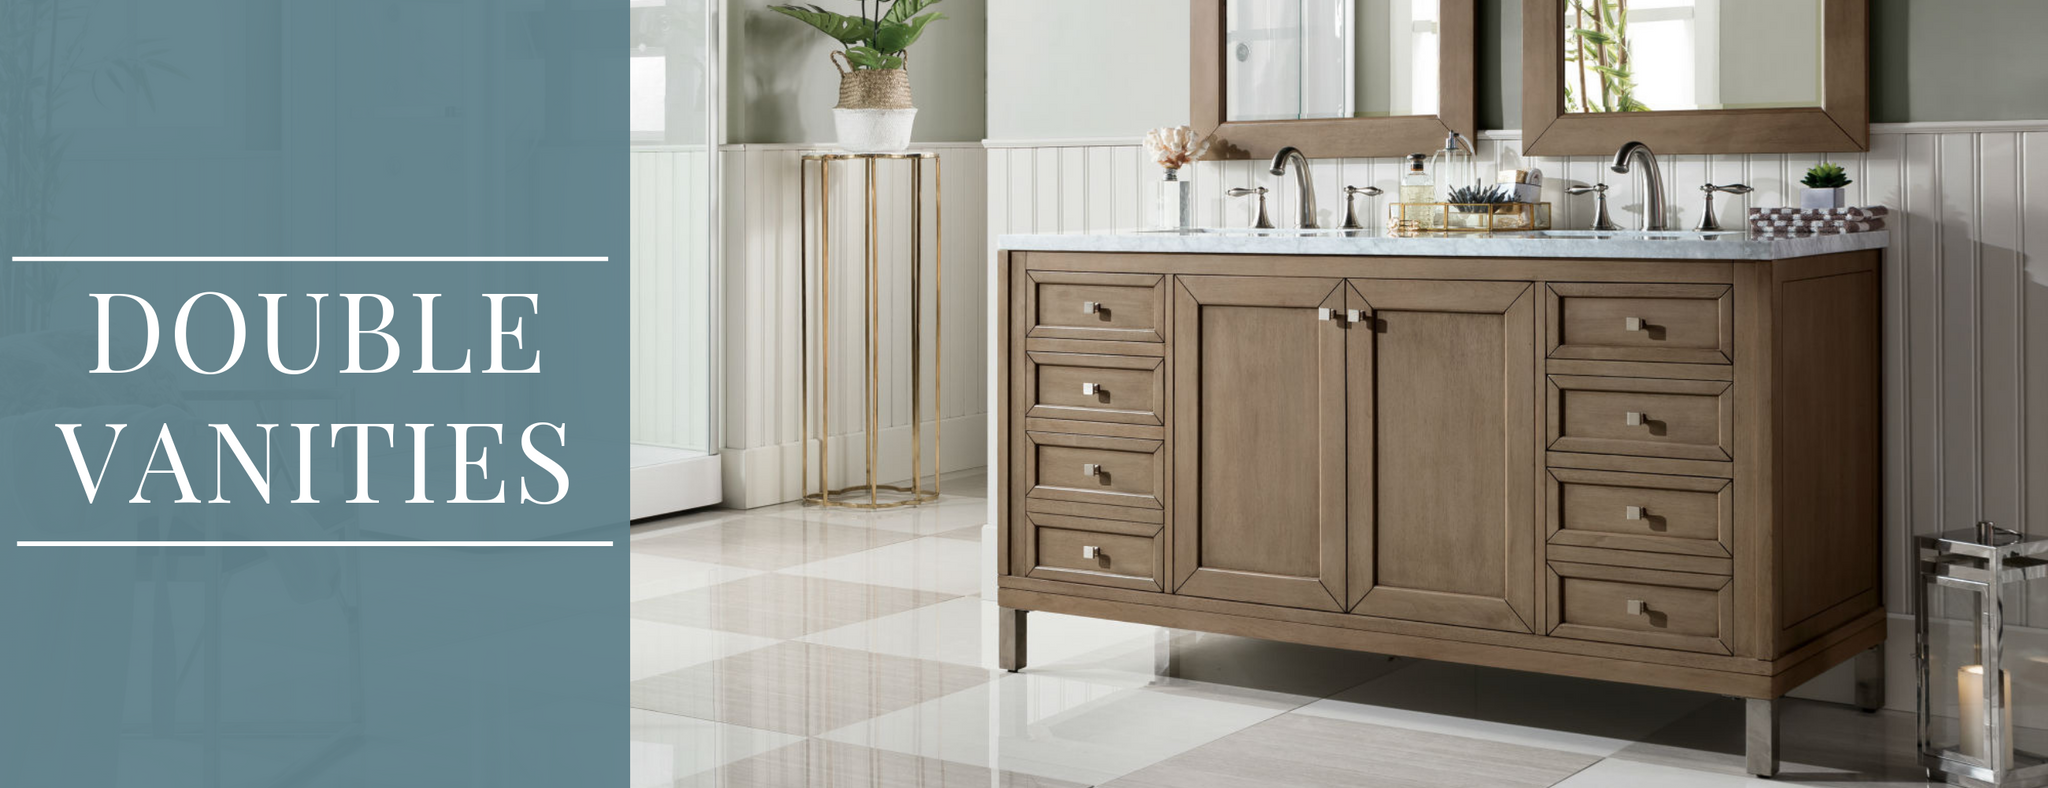 Leader In Quality Single And Double Bathroom Vanity Cabinets